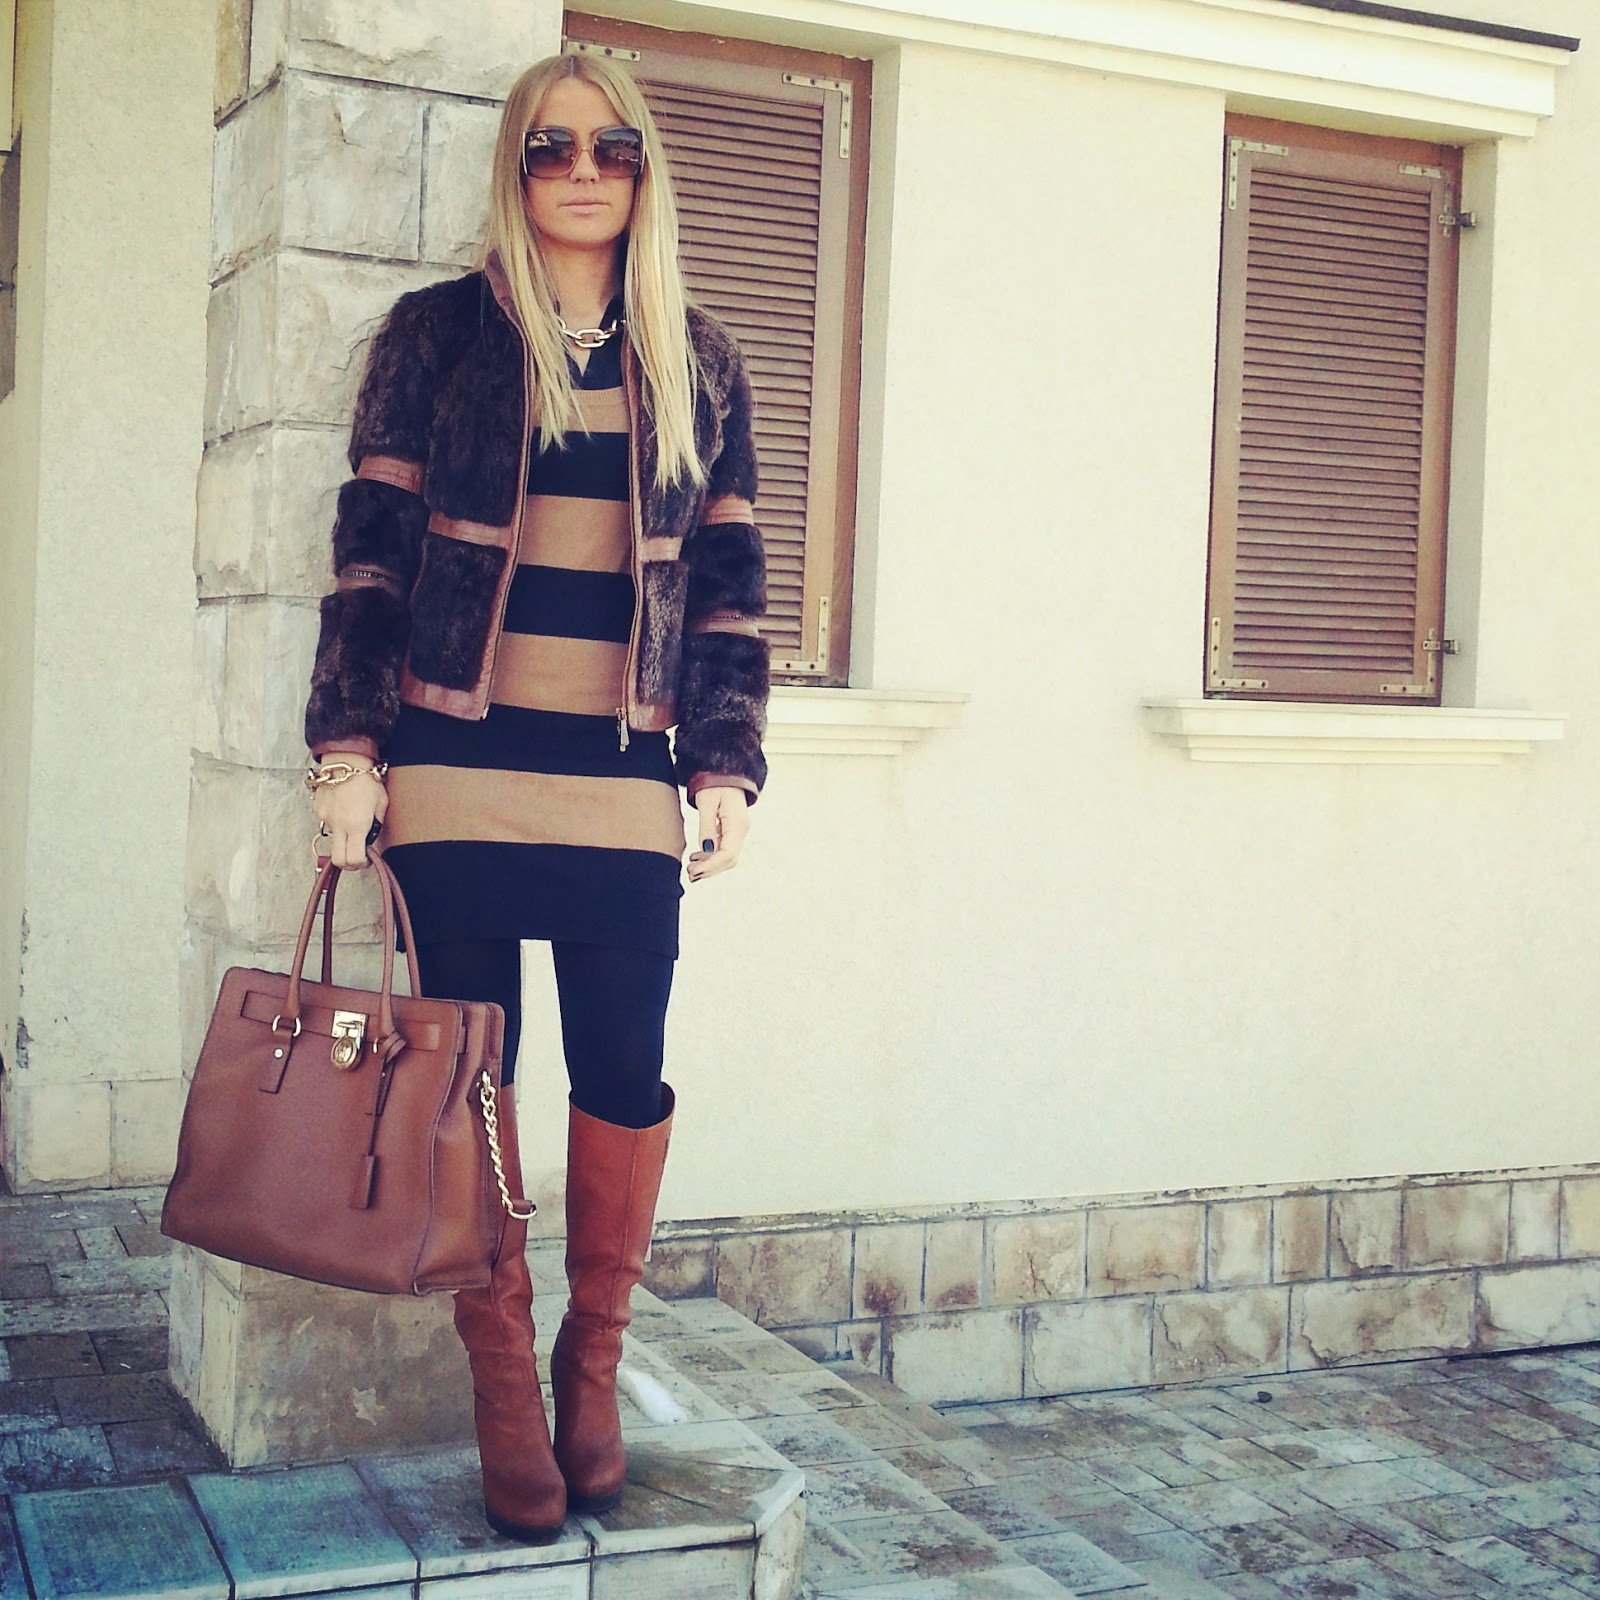 Balkan style by M.: Quick outfit post